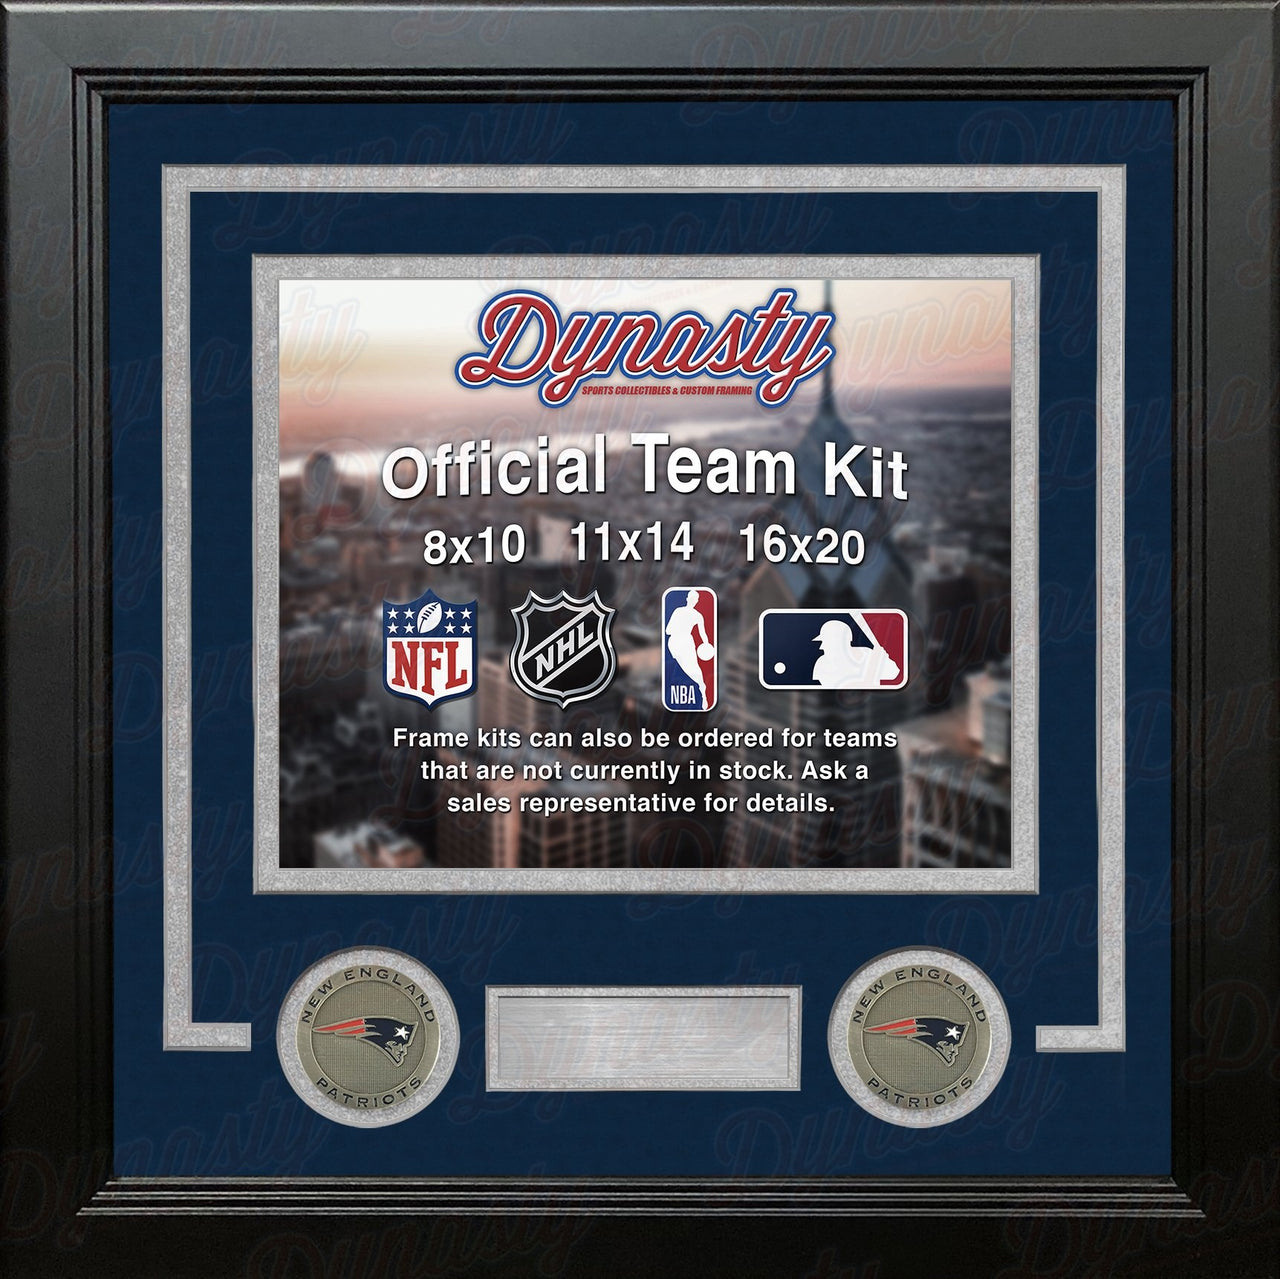 New England Patriots Custom NFL Football 16x20 Picture Frame Kit (Multiple Colors) - Dynasty Sports & Framing 